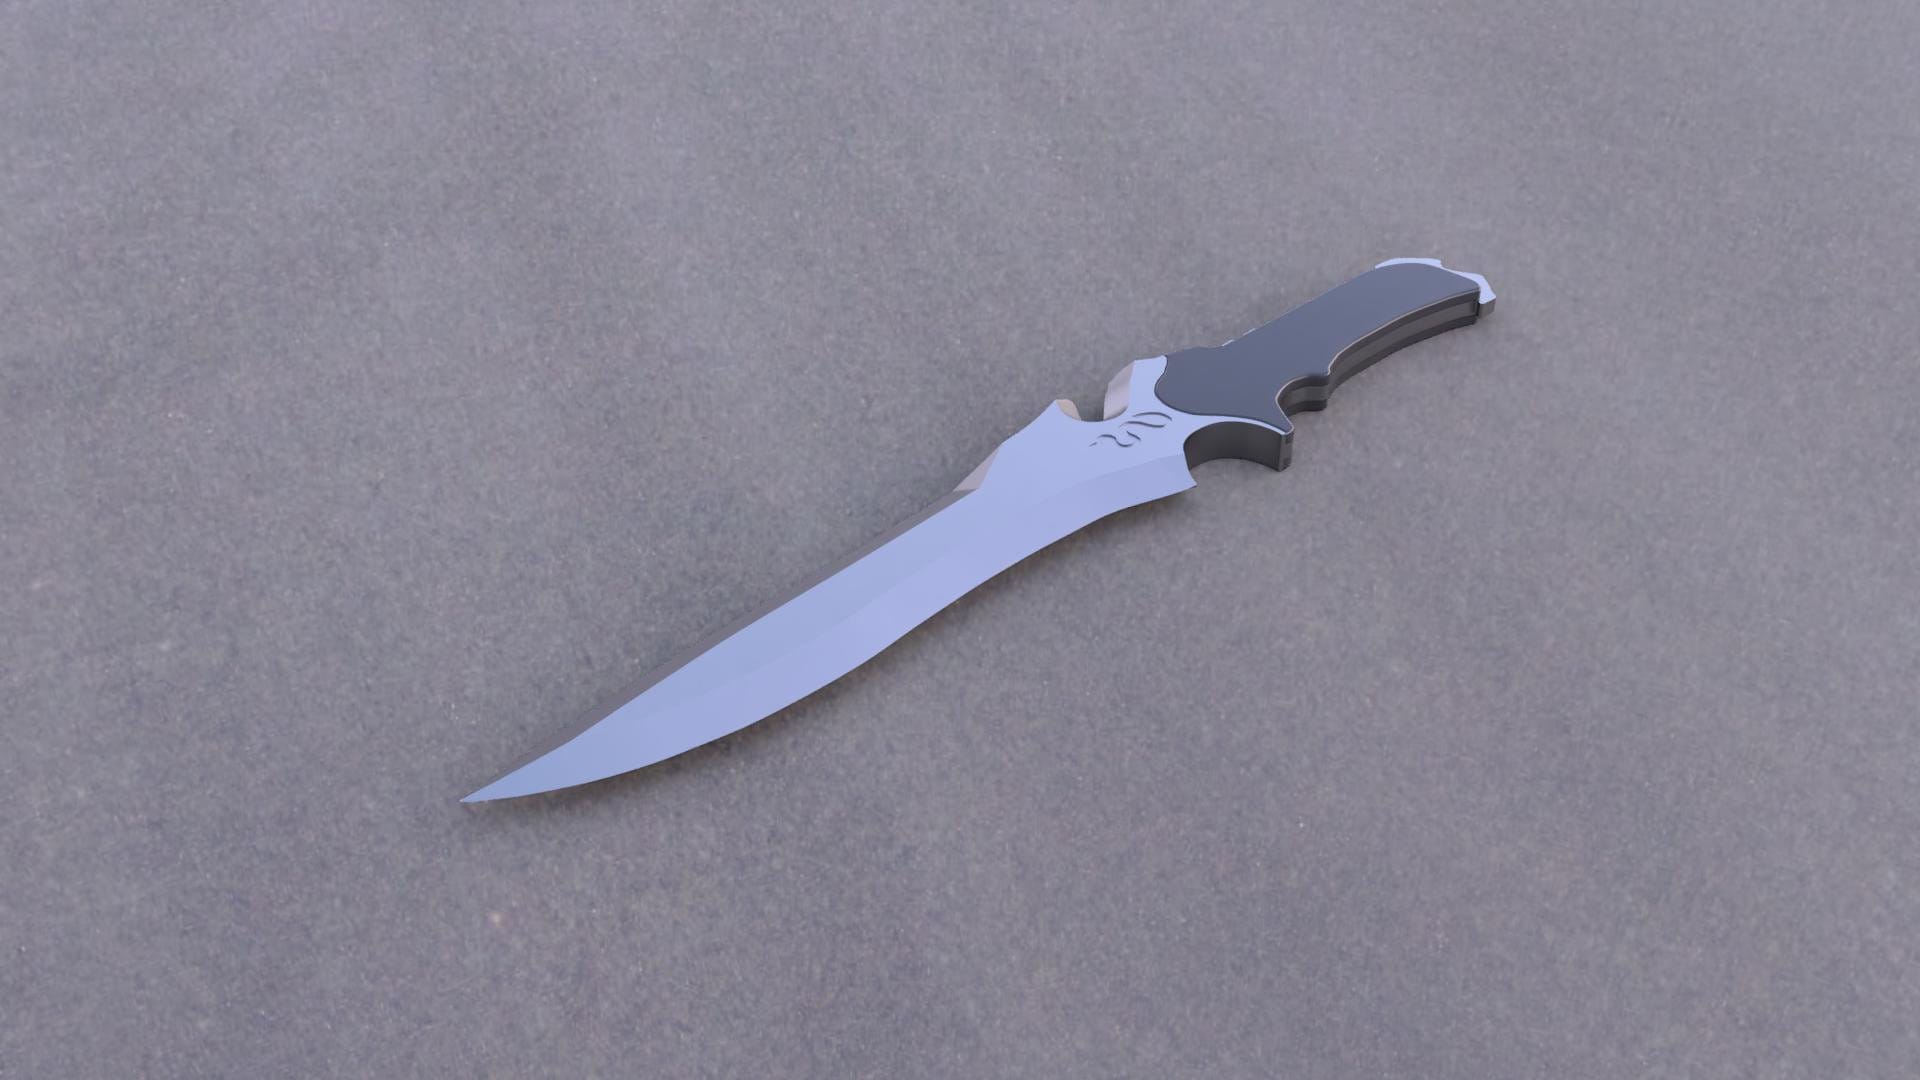 New other Jack Krauser tactical knife cosplay prop replica resident